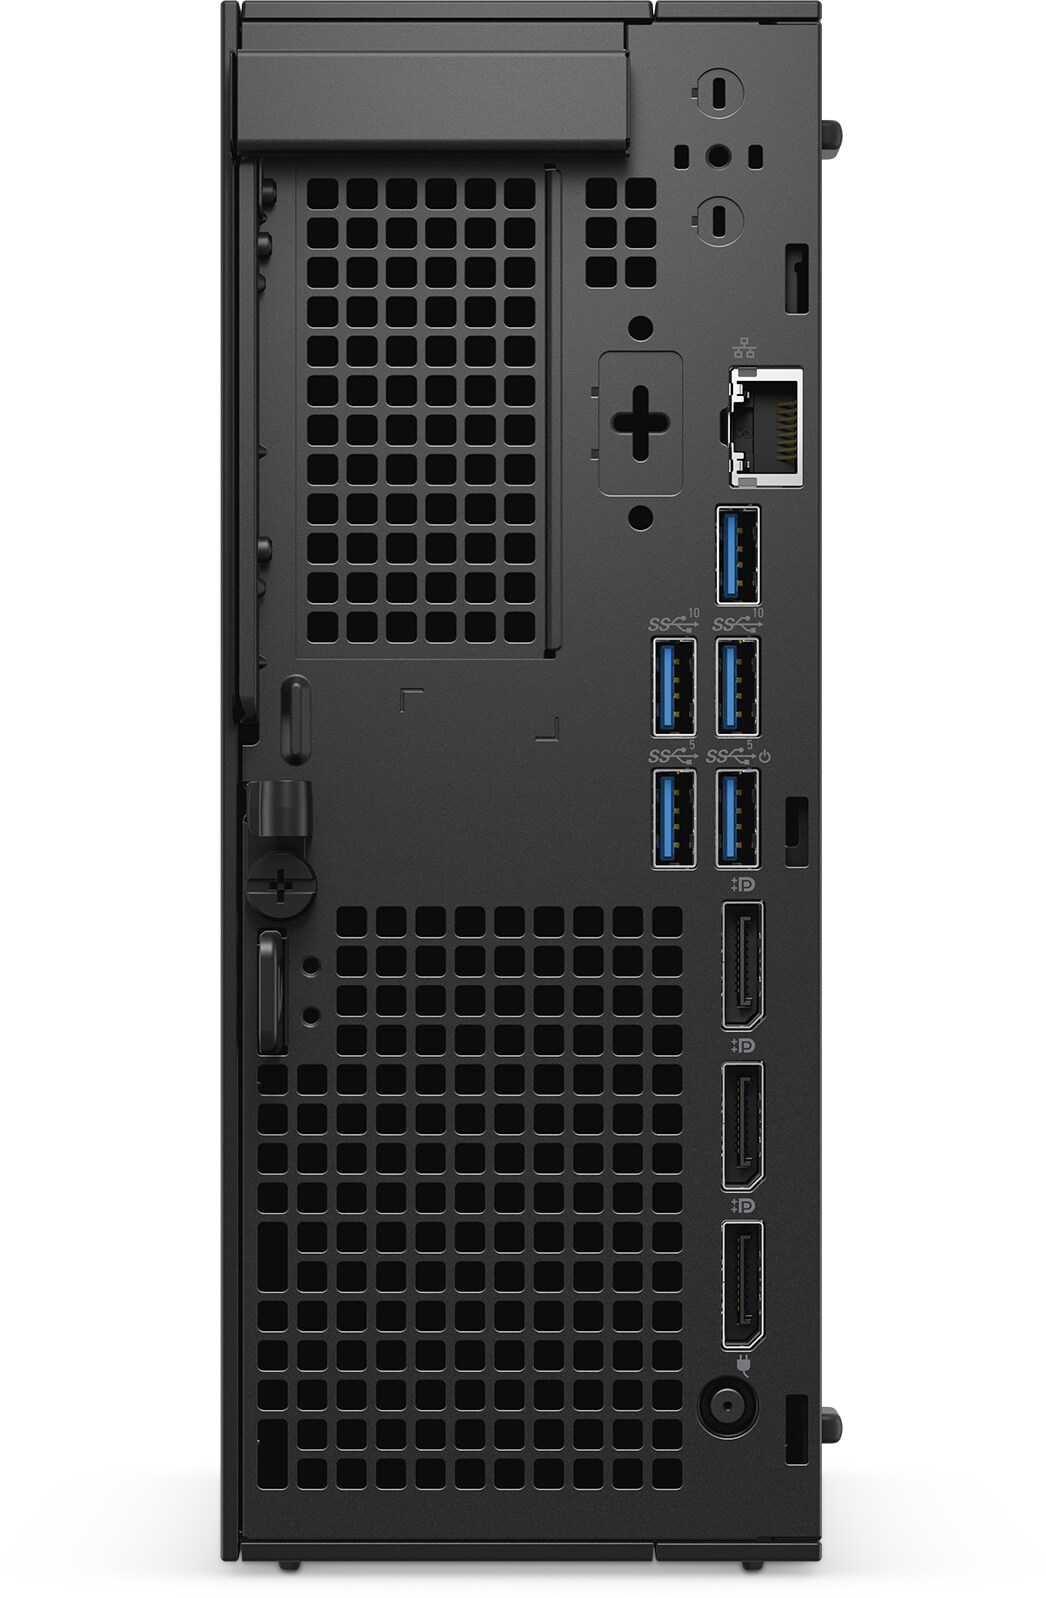 New Precision 3280 Compact Workstation